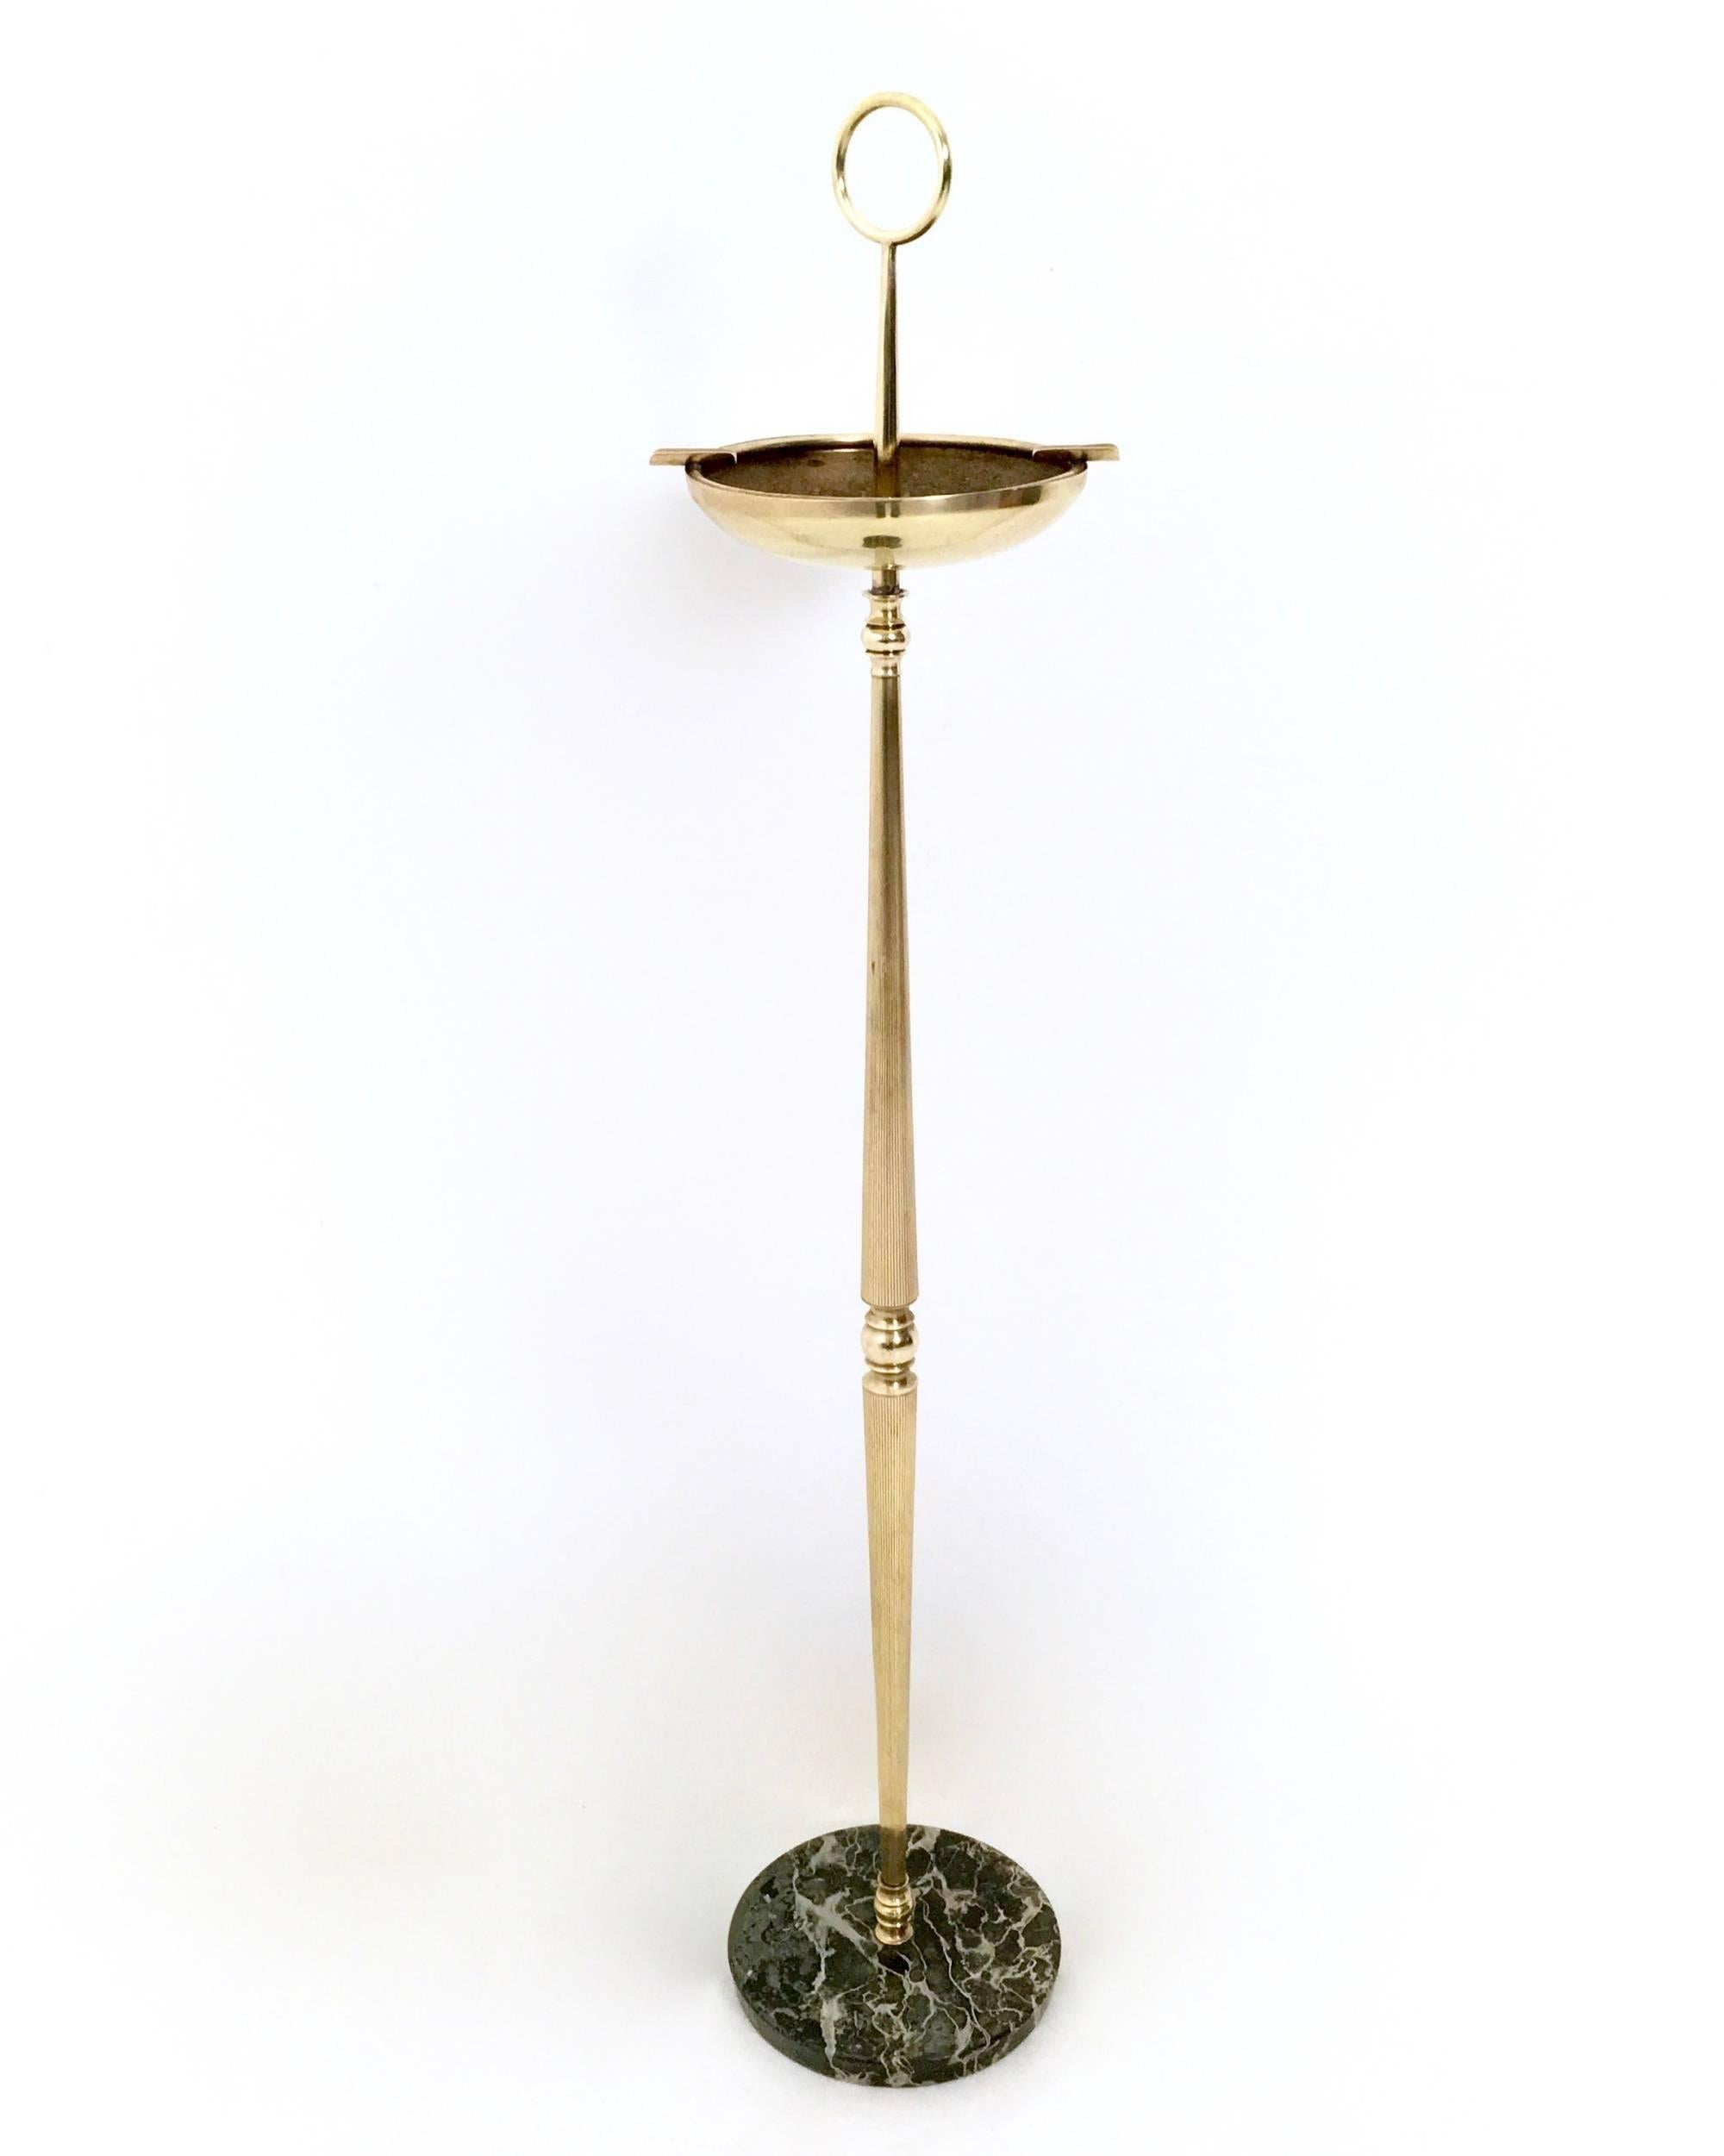 Made in brass, it features a Portoro marble base.
In very good original condition and ready to become a piece in a home.

Measure: Diameter 20 cm 
Height 85 cm. 

 